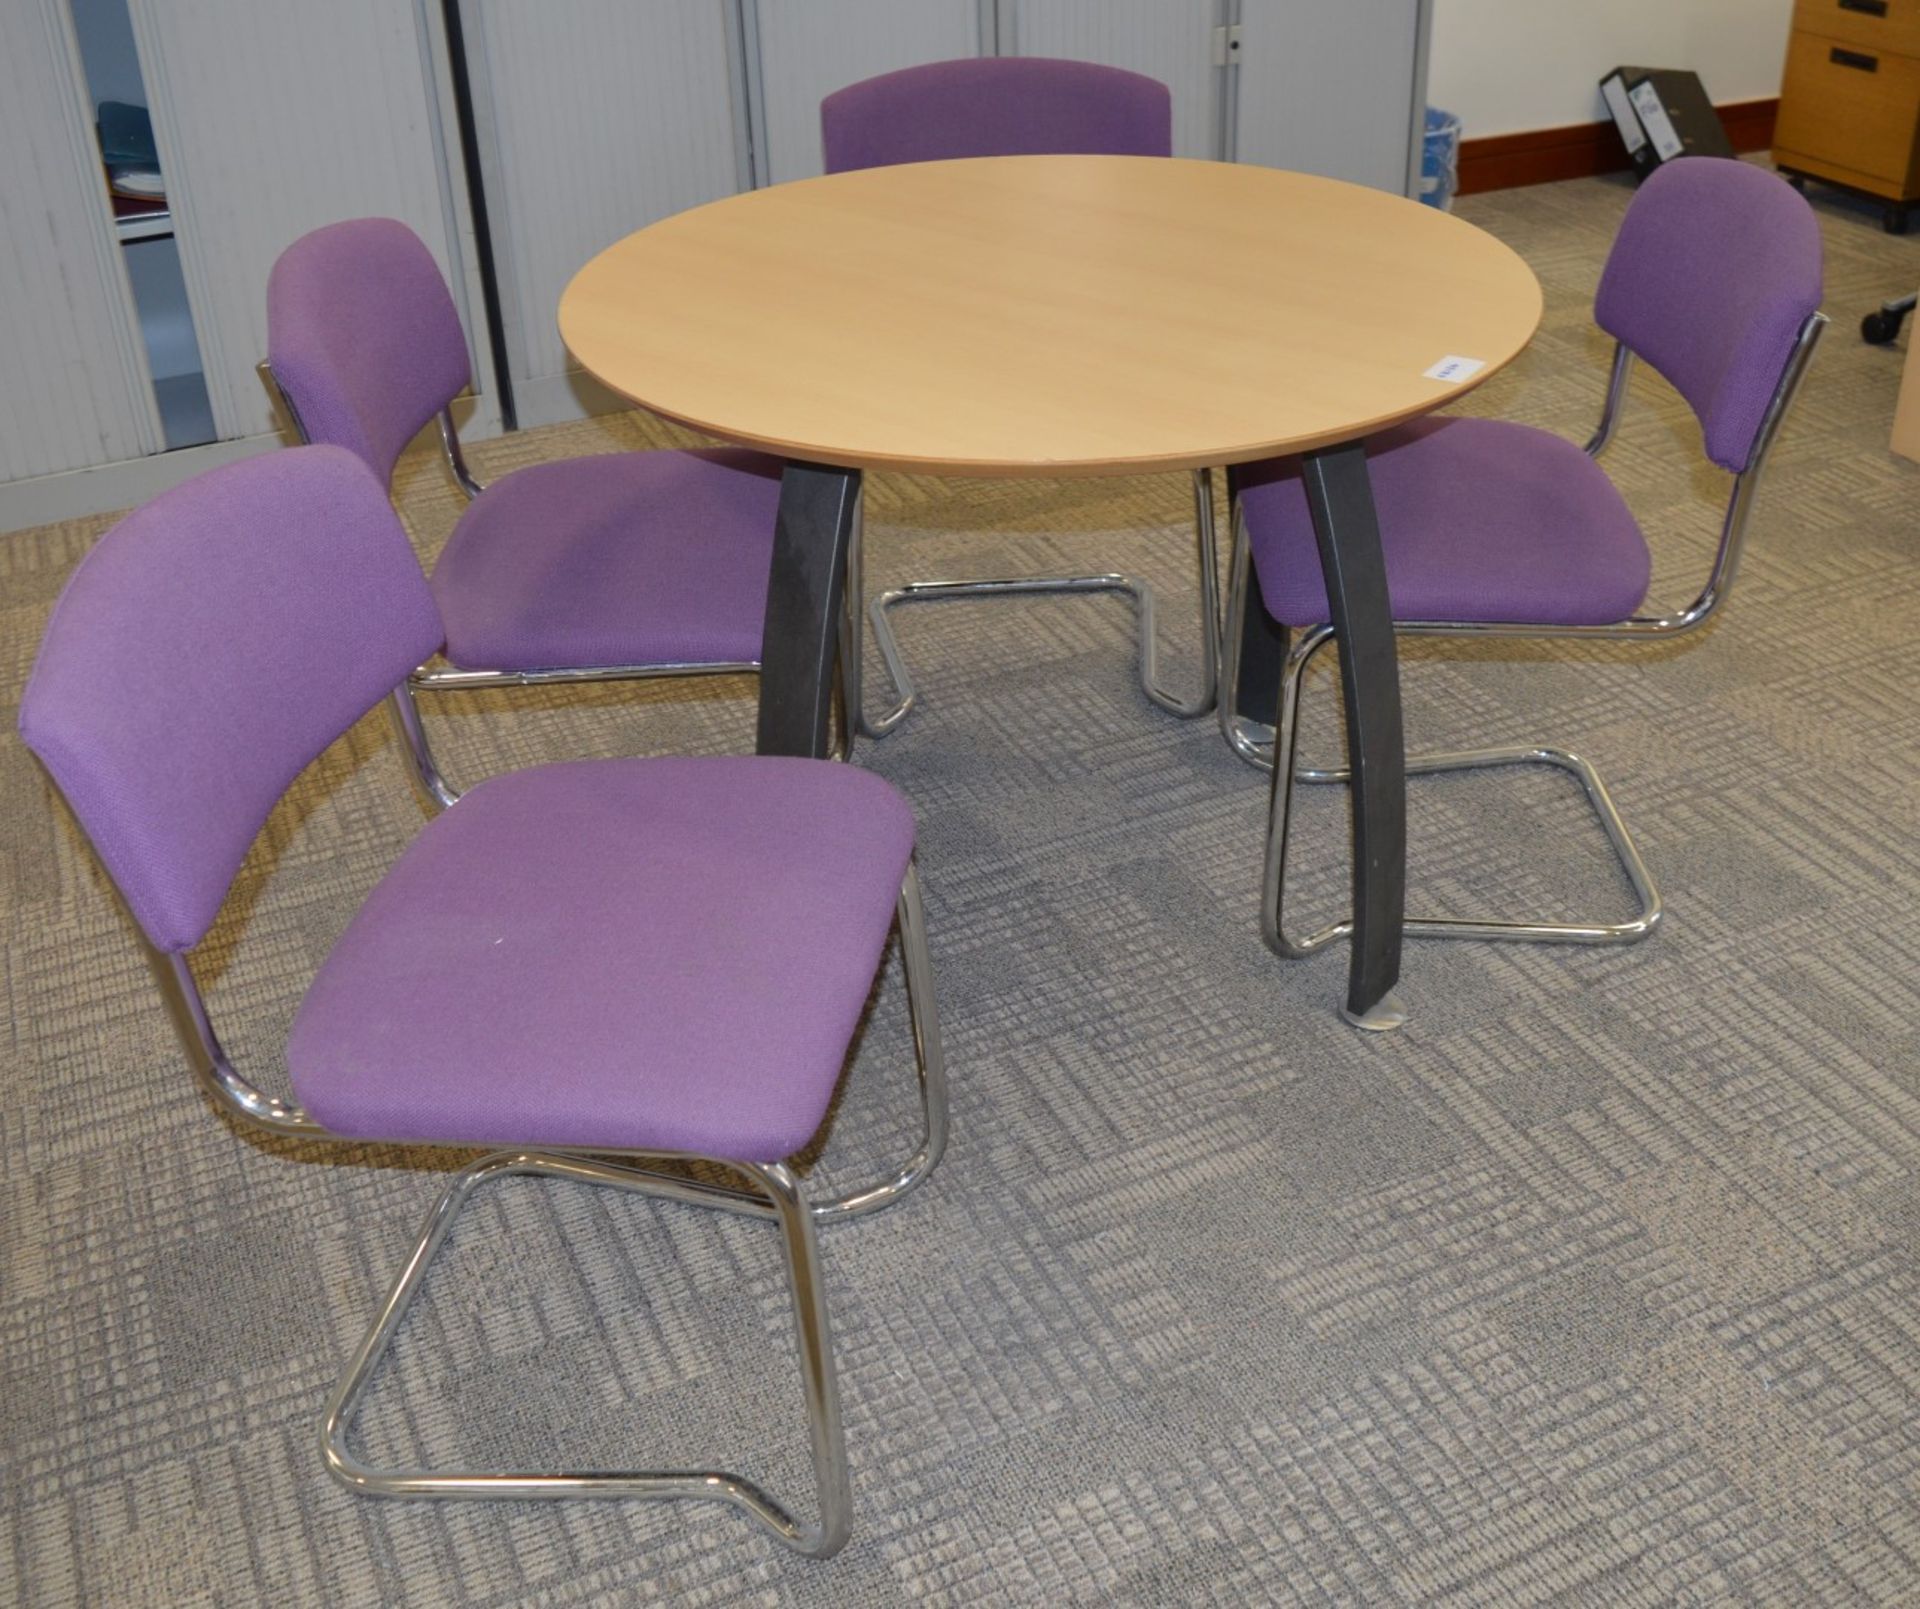 4 x Office Stacking Chairs - Purple Fabric With Chrome Base - CL106 - Good Condition - Location: - Image 2 of 4